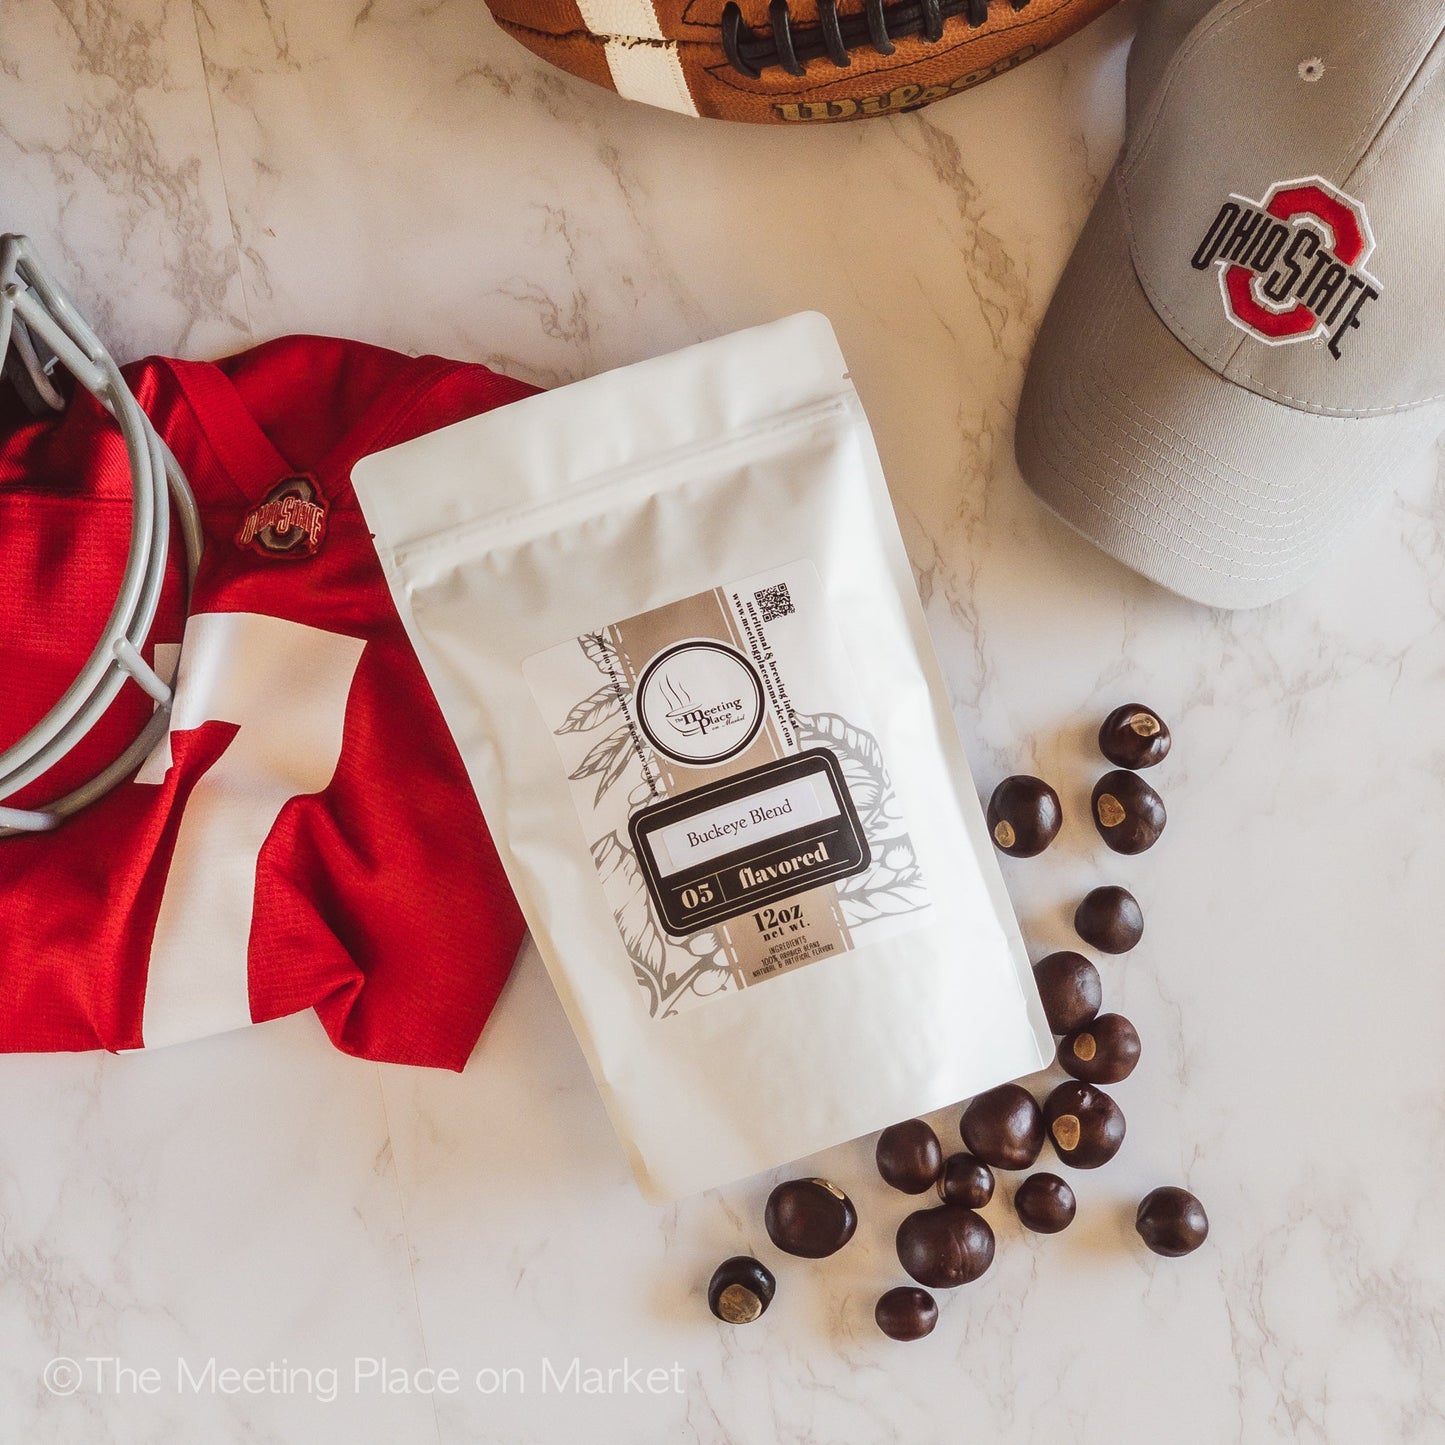 Buckeye Blend | Chocolate & Peanut Butter Flavored Coffee Beans / Ground Coffee Gourmet Coffee - The Meeting Place on Market